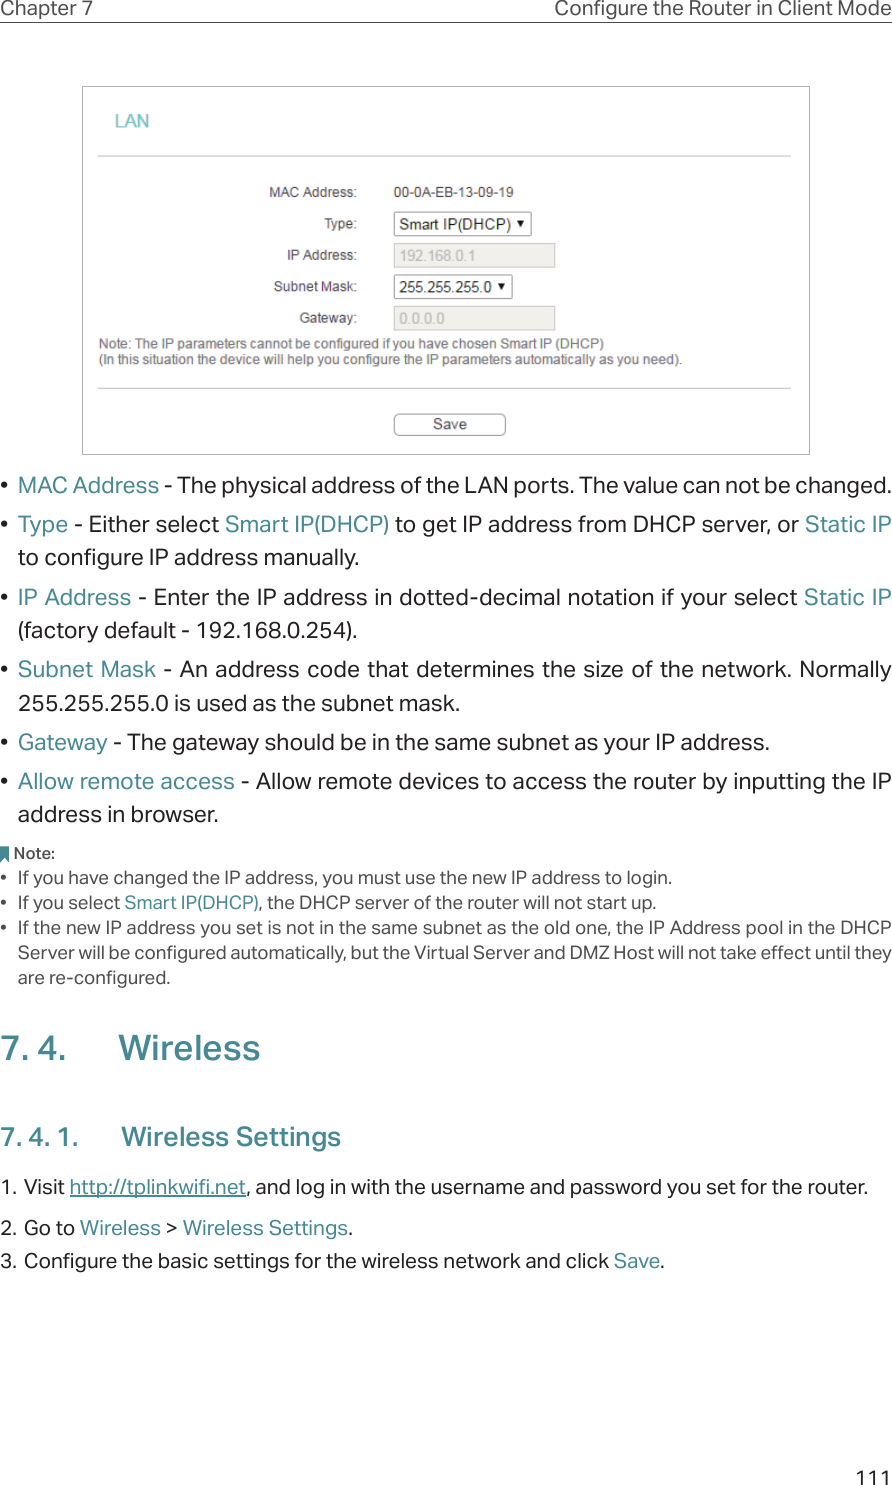 111Chapter 7 Congure the Router in Client Mode•  MAC Address - The physical address of the LAN ports. The value can not be changed.•  Type - Either select Smart IP(DHCP) to get IP address from DHCP server, or Static IP to configure IP address manually.•  IP Address - Enter the IP address in dotted-decimal notation if your select Static IP (factory default - 192.168.0.254).•  Subnet Mask - An address code that determines the size of the network. Normally 255.255.255.0 is used as the subnet mask.•  Gateway - The gateway should be in the same subnet as your IP address.•  Allow remote access - Allow remote devices to access the router by inputting the IP address in browser.Note:•  If you have changed the IP address, you must use the new IP address to login.•  If you select Smart IP(DHCP), the DHCP server of the router will not start up.•  If the new IP address you set is not in the same subnet as the old one, the IP Address pool in the DHCP Server will be configured automatically, but the Virtual Server and DMZ Host will not take effect until they are re-configured.7. 4.  Wireless7. 4. 1.  Wireless Settings1. Visit http://tplinkwifi.net, and log in with the username and password you set for the router.2. Go to Wireless &gt; Wireless Settings. 3. Configure the basic settings for the wireless network and click Save.